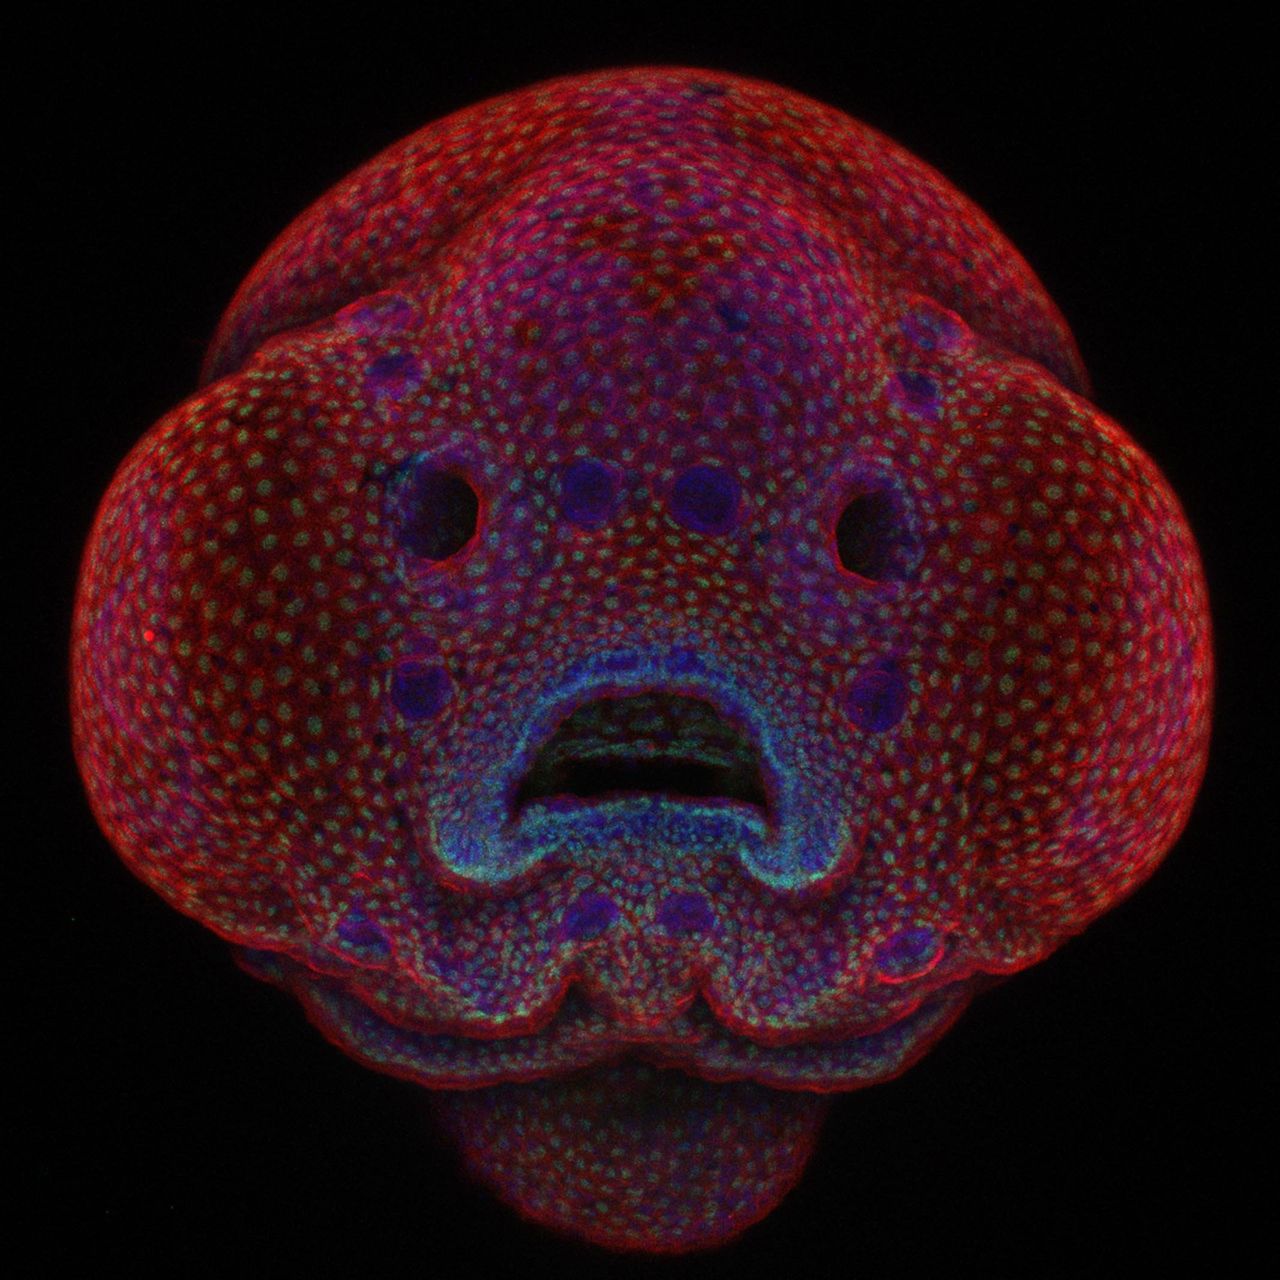 First place in this year's Nikon Small World contest went to Dr. Oscar Ruiz of the University of Texas MD Anderson Cancer Center in Houston for his photo of a four-day-old zebrafish embryo.